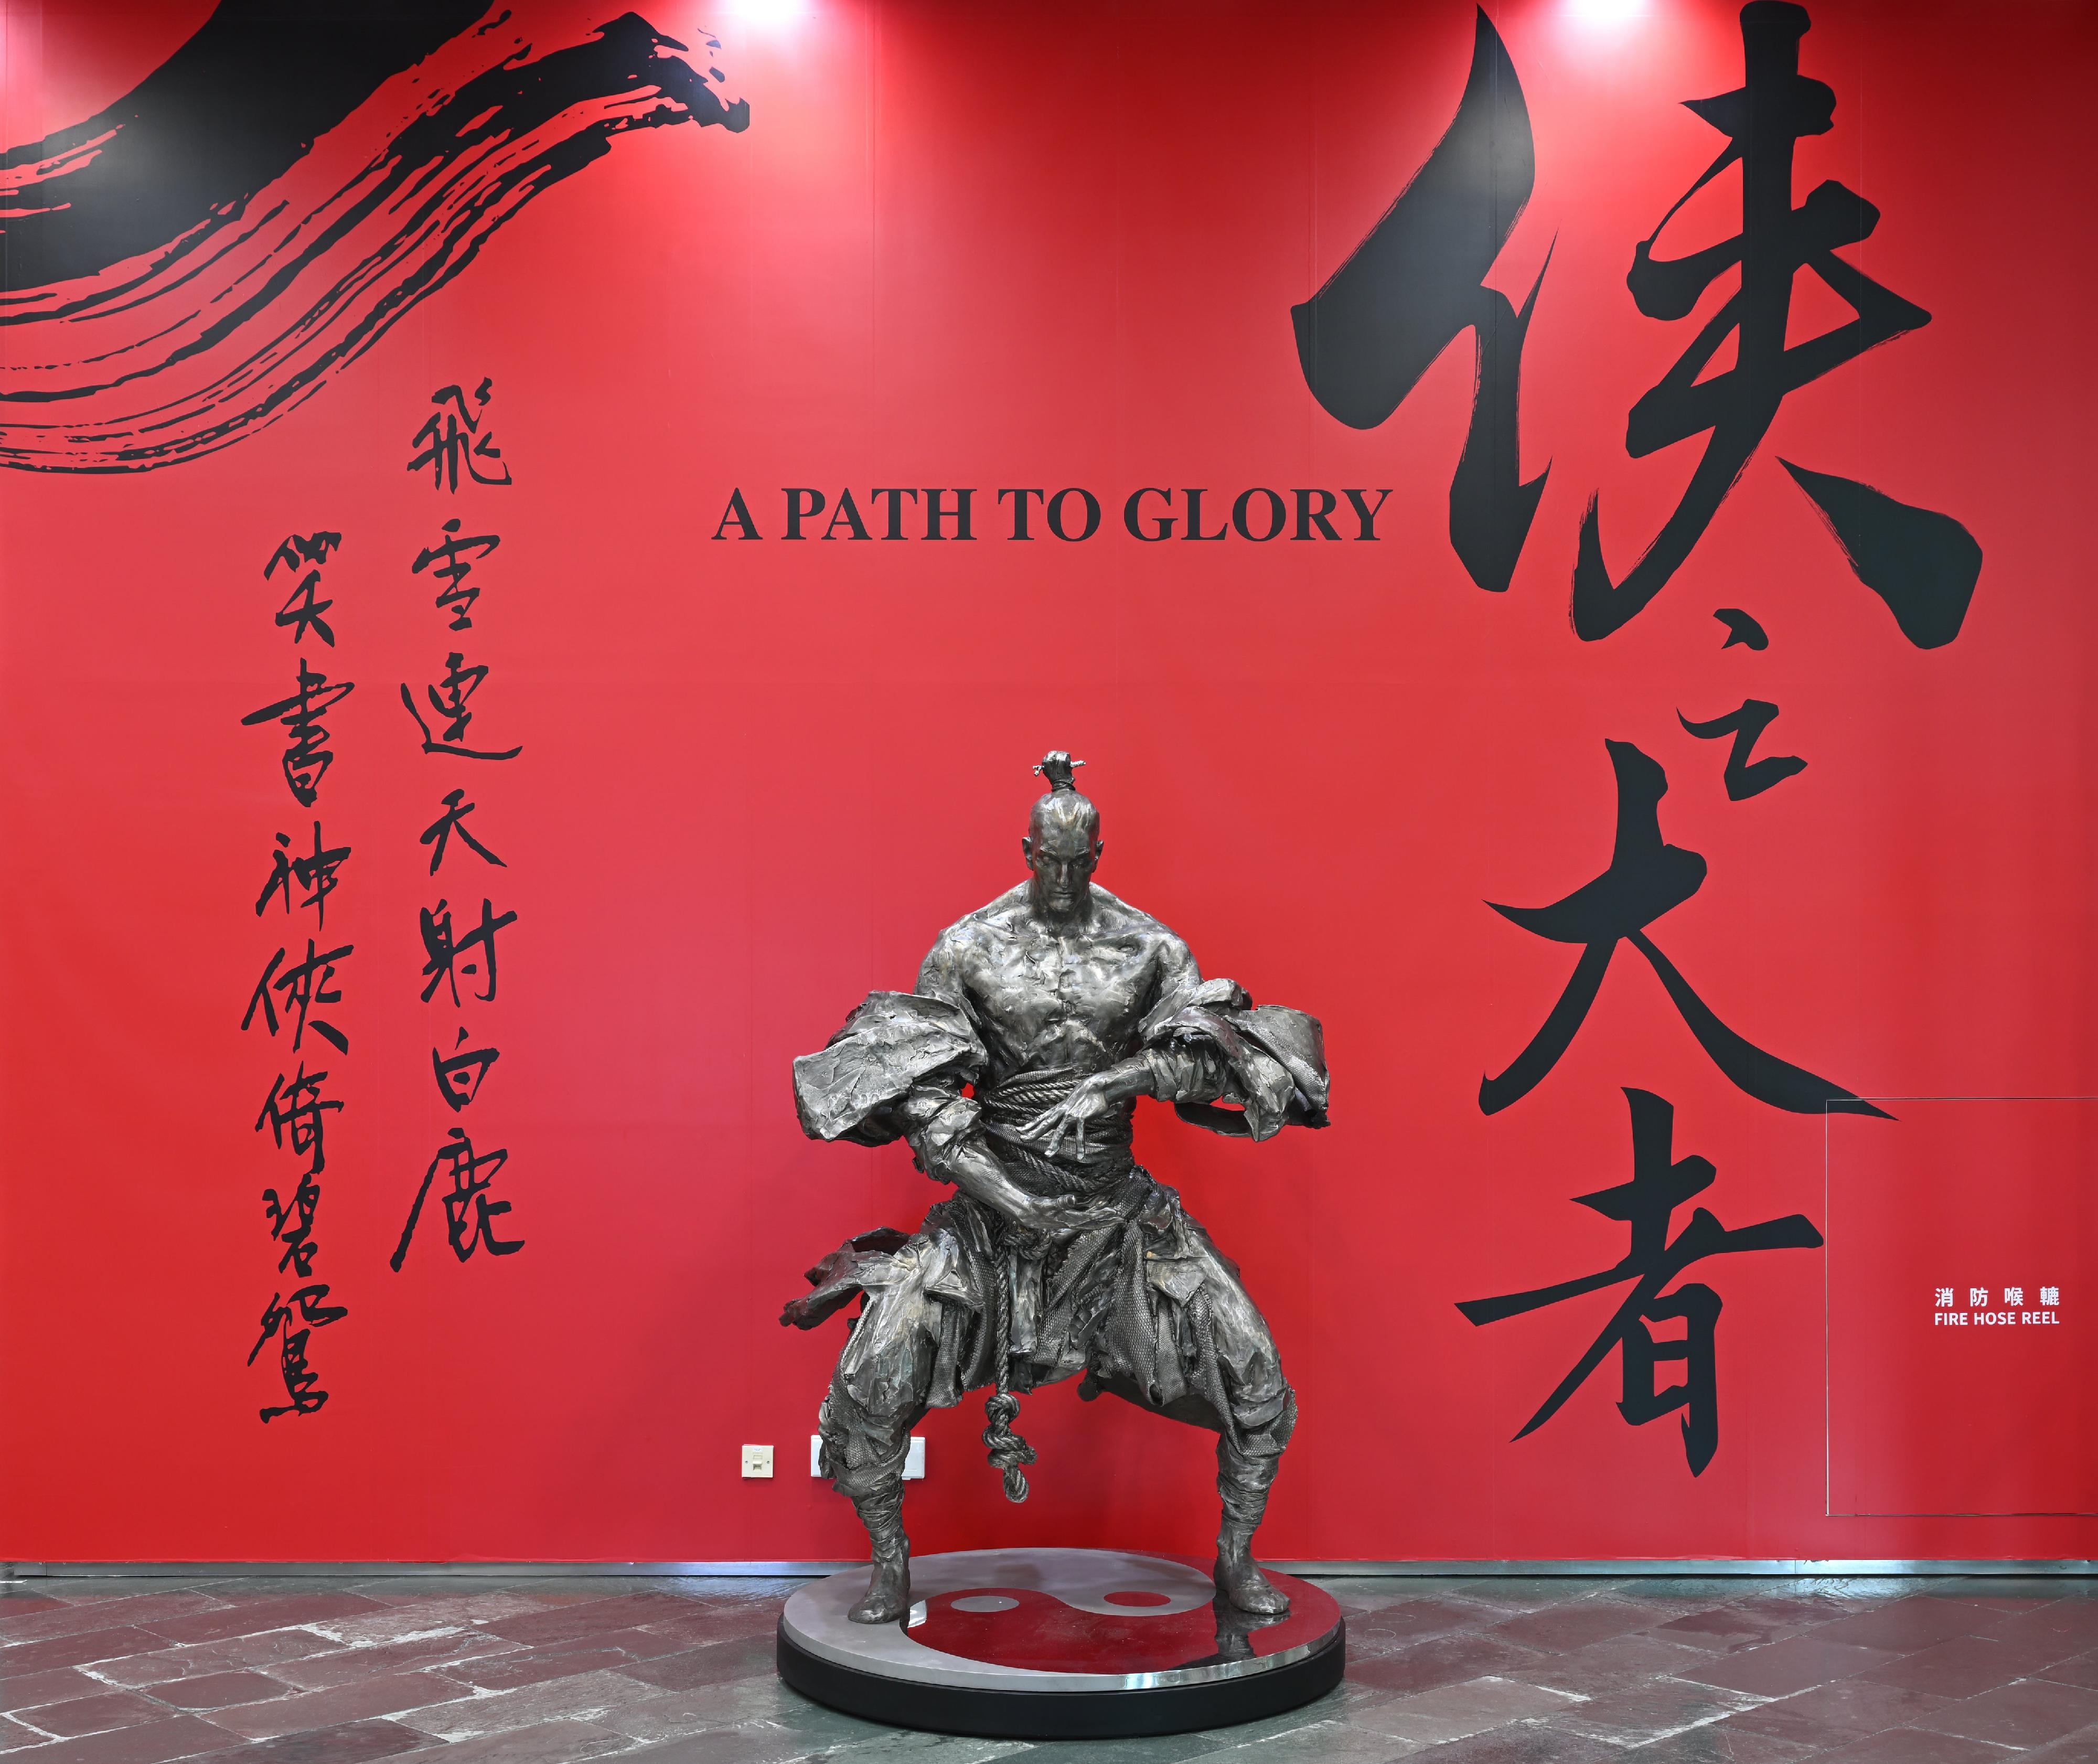 To commemorate the 100th anniversary of the birth of Dr Louis Cha (Jin Yong), the Hong Kong Heritage Museum will launch the "A Path to Glory - Jin Yong's Centennial Memorial, Sculpted by Ren Zhe" exhibition from March 16 to October 7.